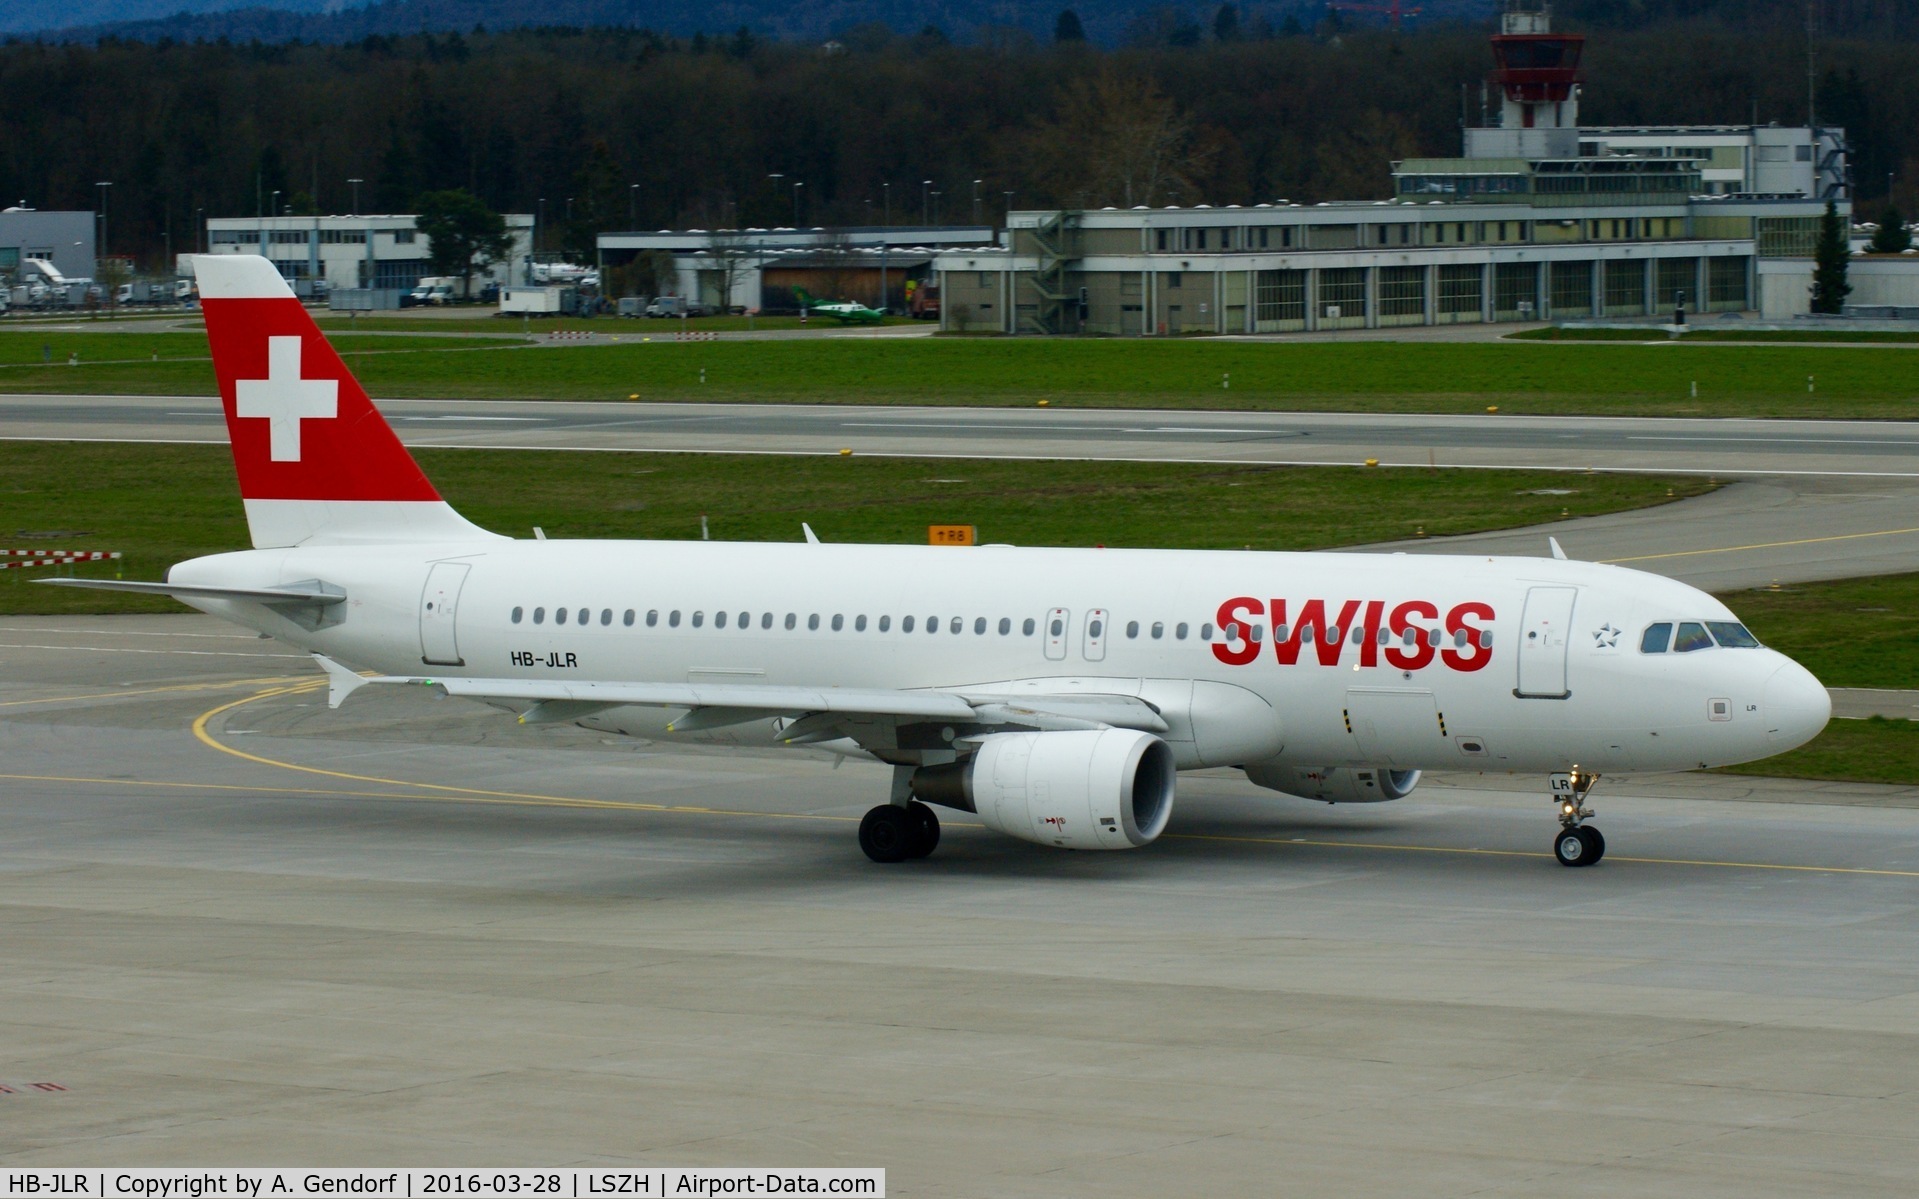 HB-JLR, 2012 Airbus A320-214 C/N 5037, Swiss, is here taxiing at Zürich-Kloten(LSZH)